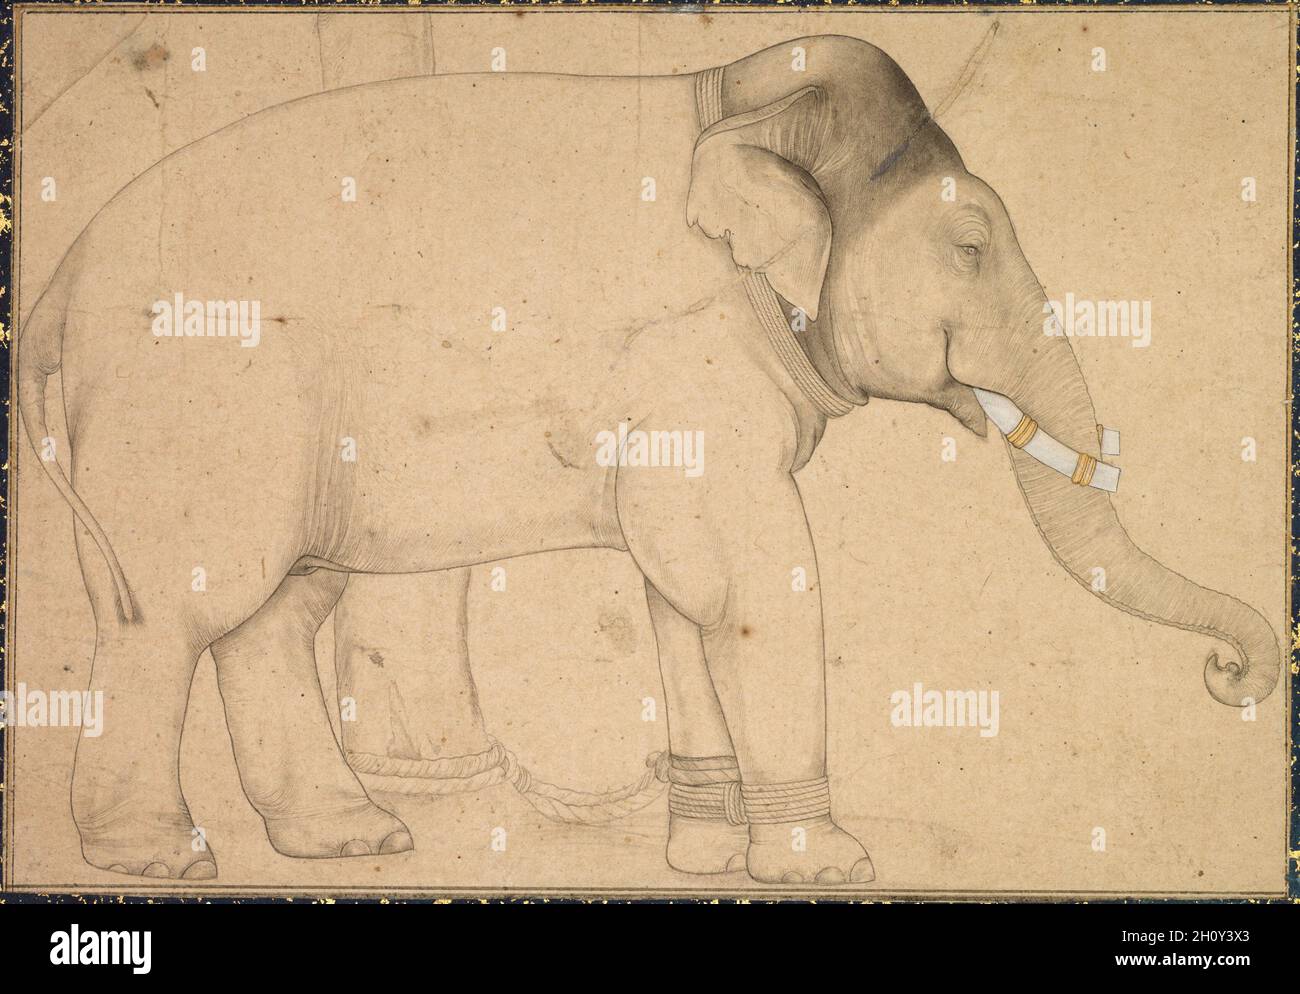 Drawing of an Elephant, c. 1700. India, Mughal School, early 18th Century. Ink on paper; image: 12.8 x 18.1 cm (5 1/16 x 7 1/8 in.); overall: 20 x 25.3 cm (7 7/8 x 9 15/16 in.).  Beginning with Babur, but especially with Akbar, the Mughal emperors displayed an enormous interest in and affection for the elephants of India. The palace housed many elephants, used by the royal court for practical tasks such as carrying heavy loads through rivers and over difficult ground, for charging into battle, and, sometimes, for executing captives. They were also used for entertainment purposes such as riding Stock Photo